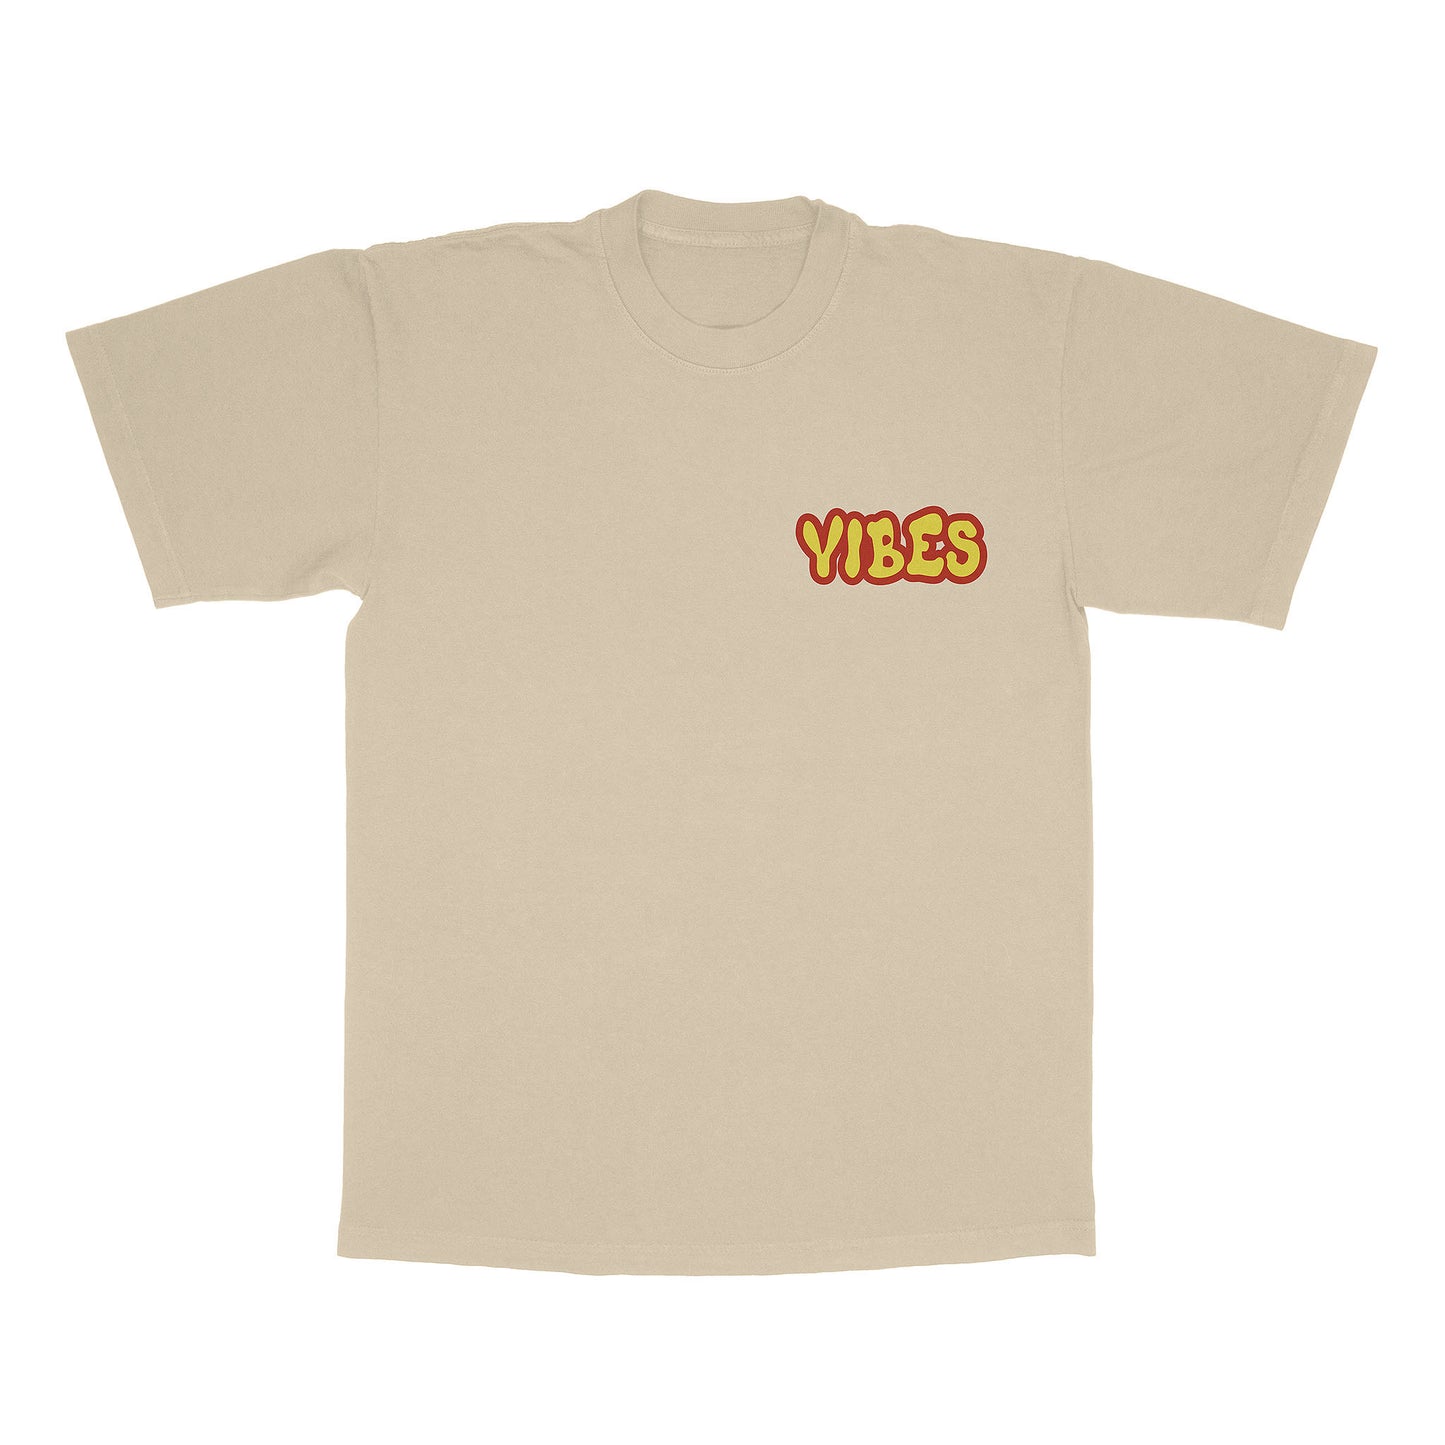 CONFESSIONS "VIBES" TEE